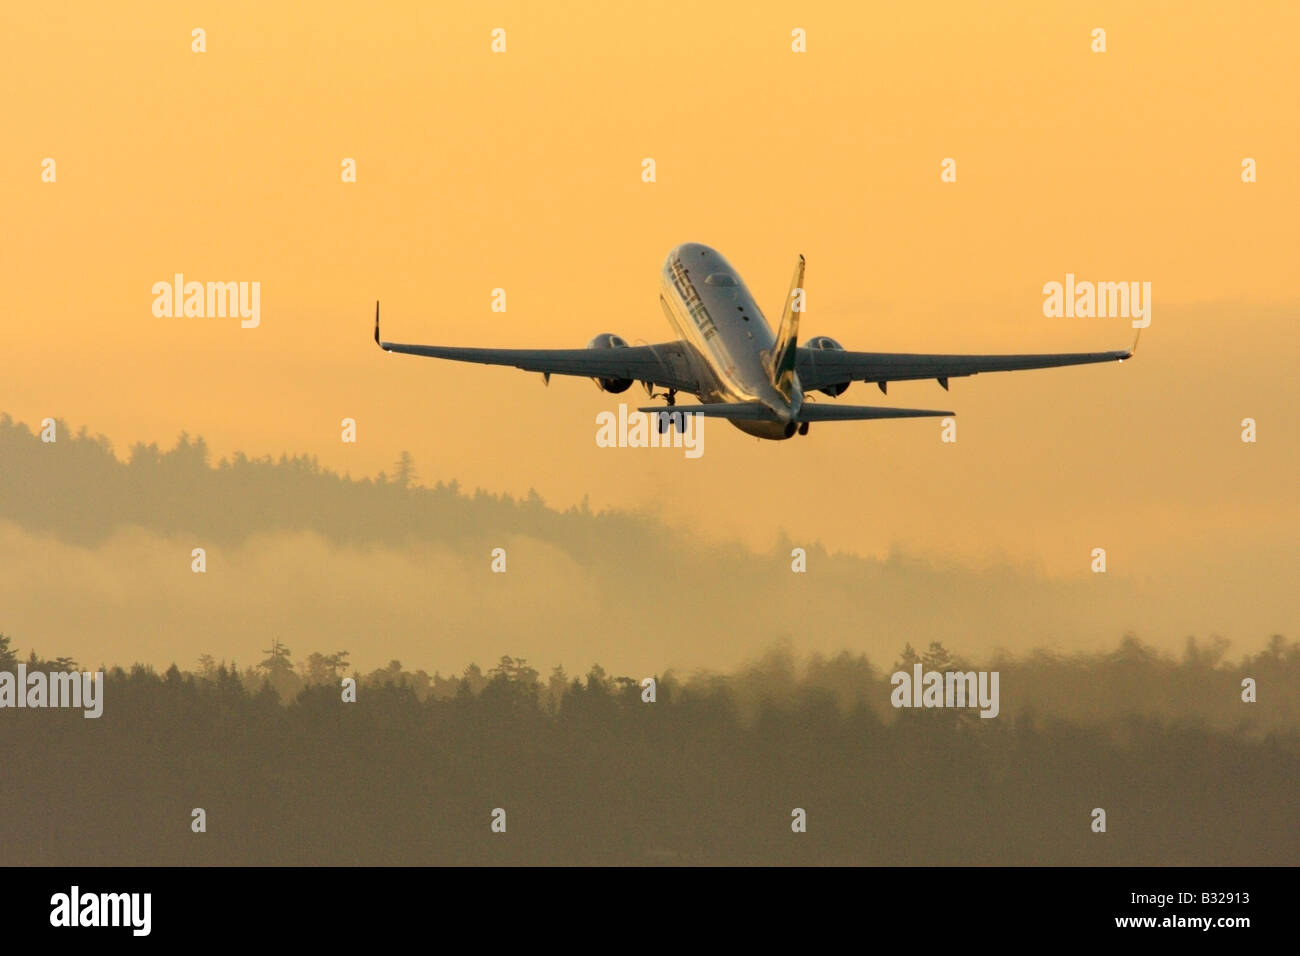 Boeing 737 700 airliner lifting off in early morning Victoria British Coolumbia Canada Stock Photo